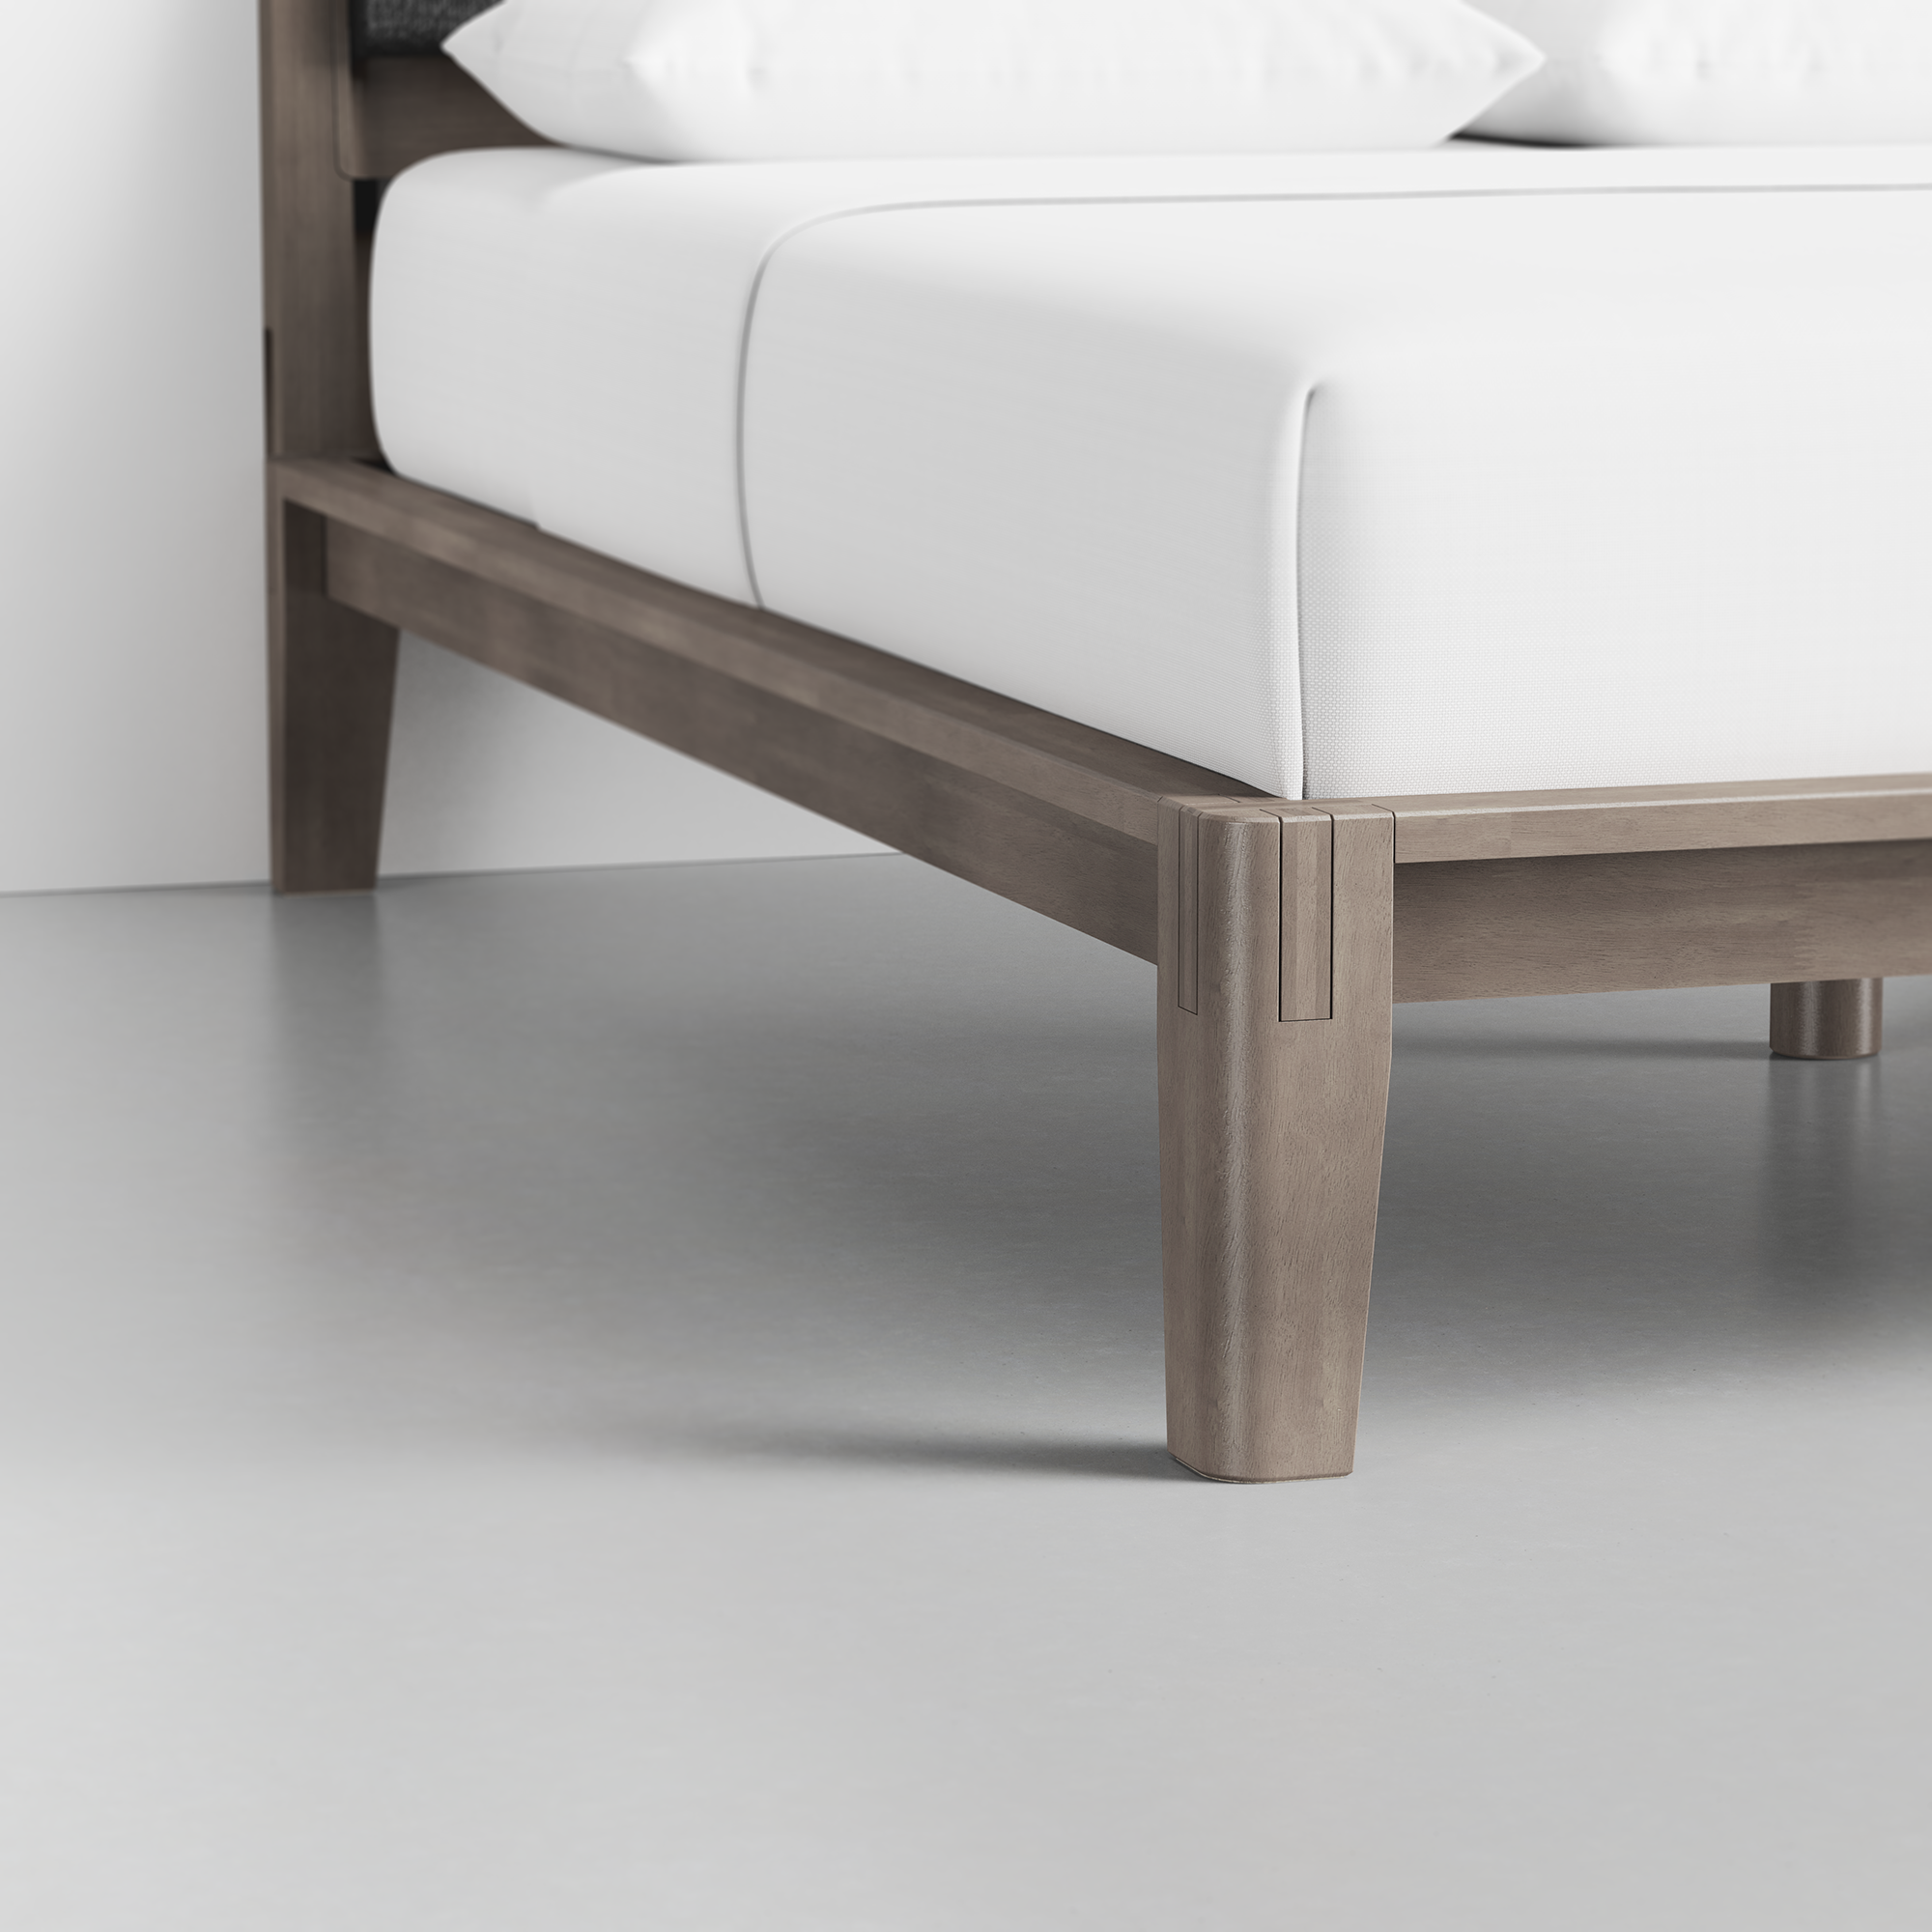 The Bed (Grey / HB Cushion Graphite) - Render - Foot Detail